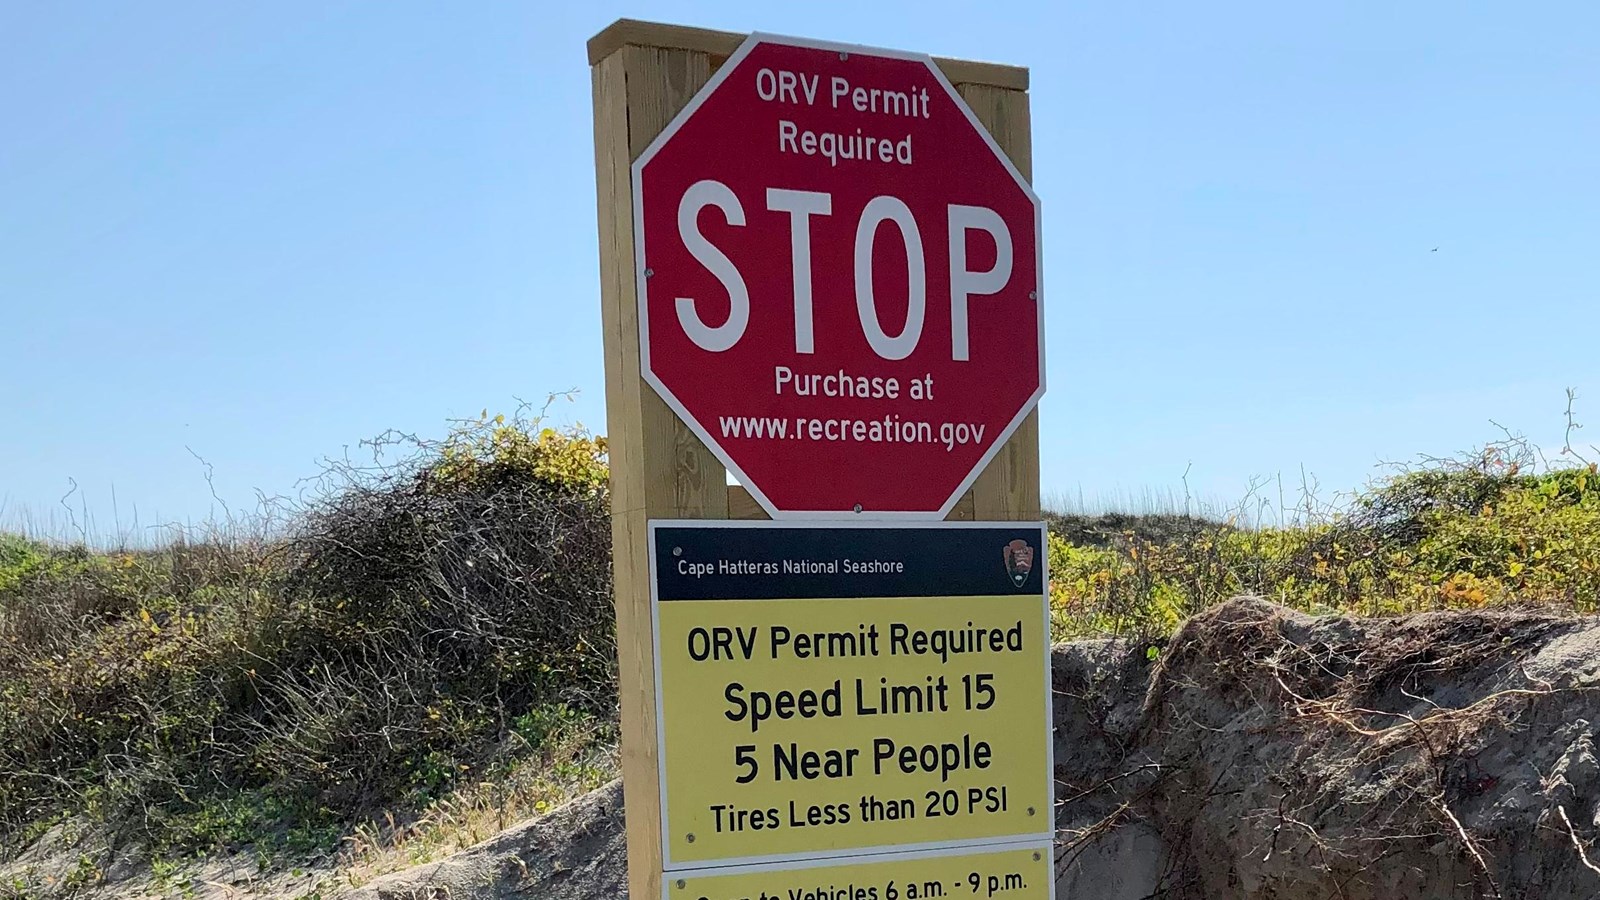 Color photo of stop sign showing info about ORV use at Cape Hatteras National Seashore.